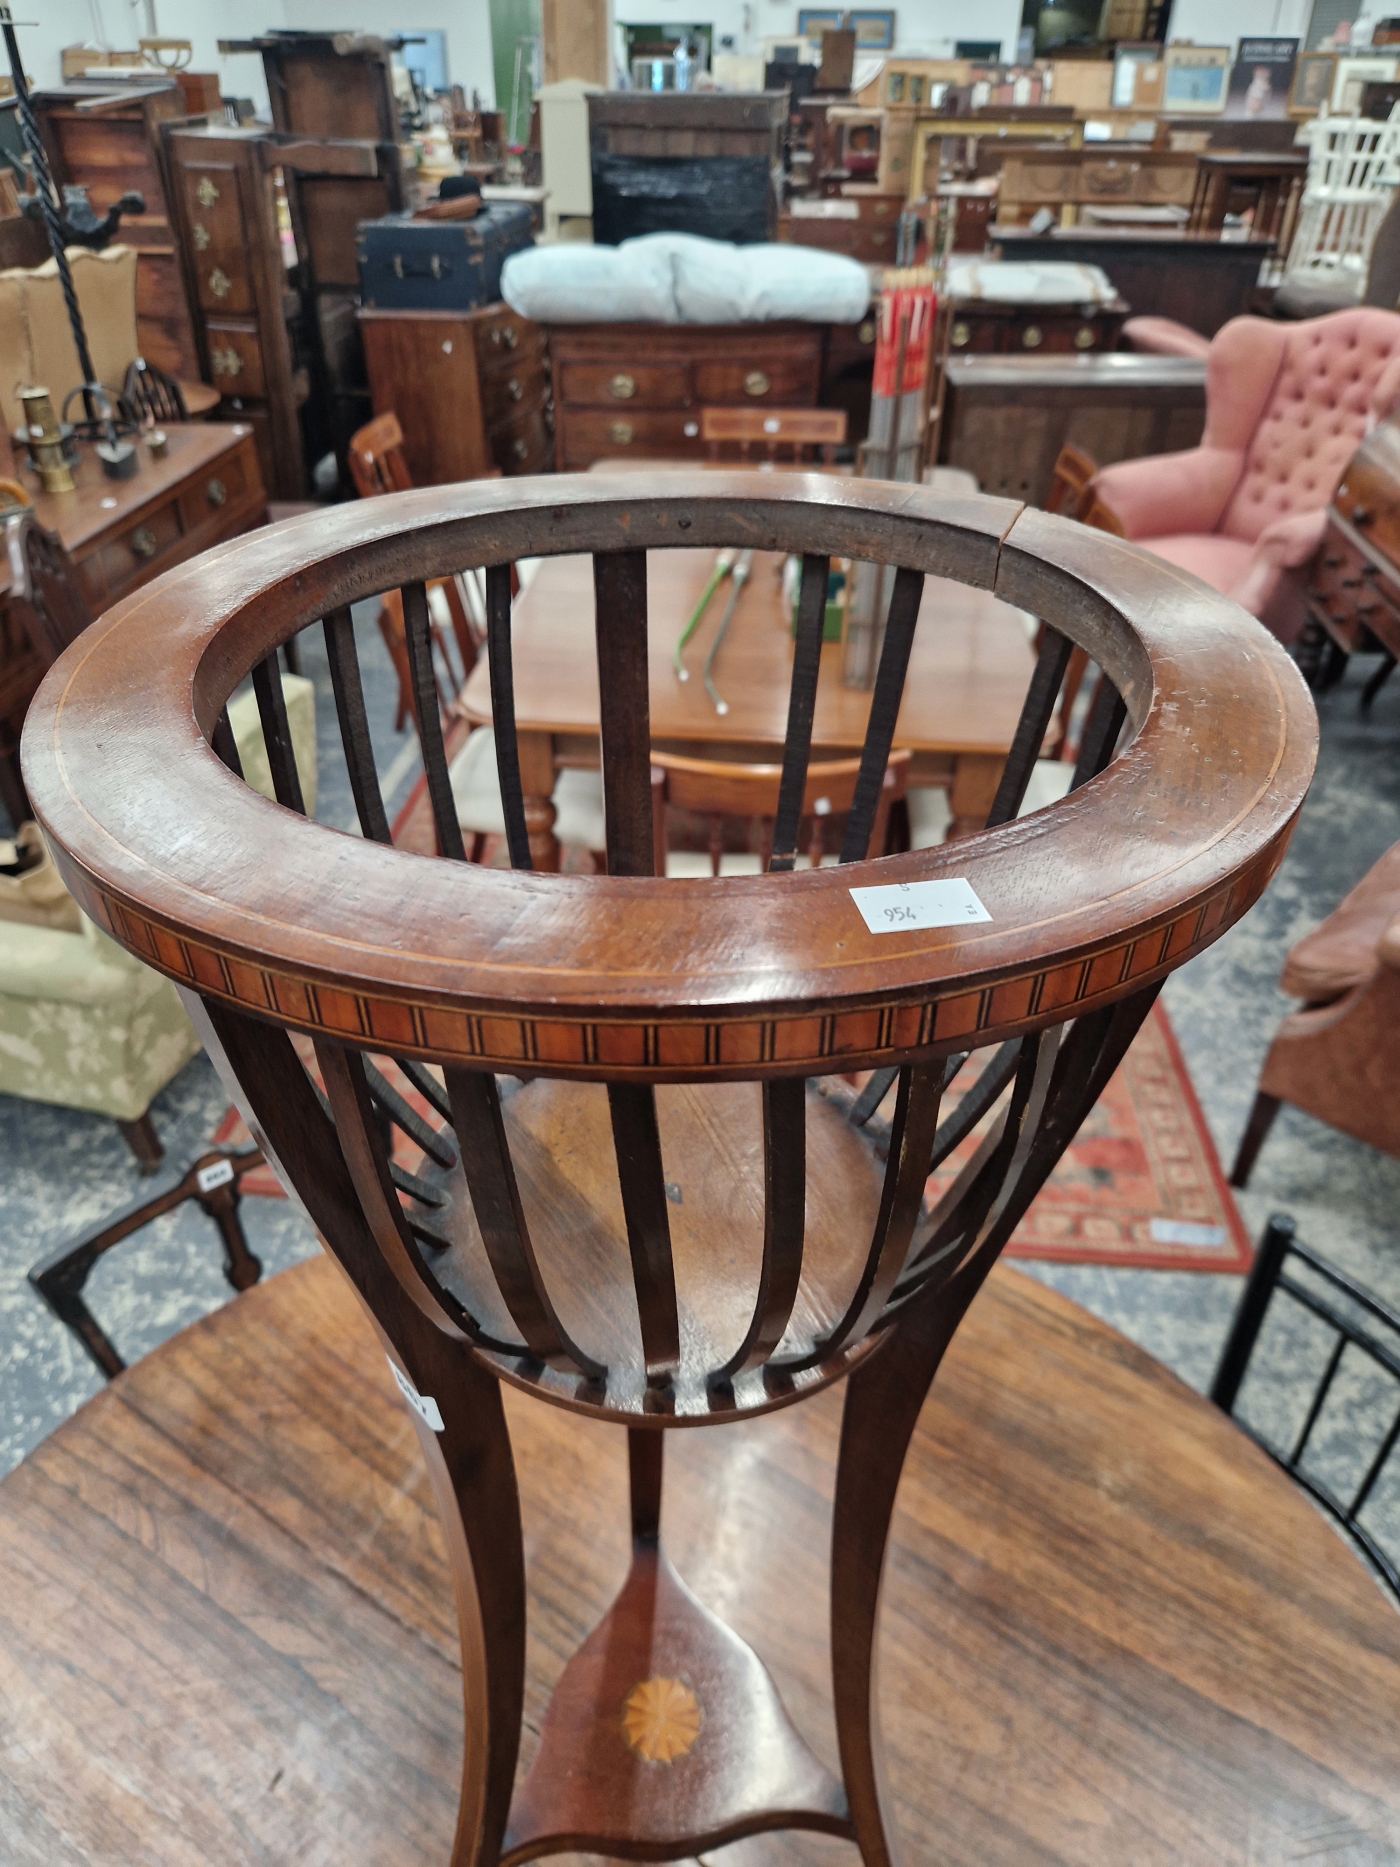 AN EARLY 20th C, LINE INLAID MAHOGANY PLANTER STAND, THE THREE DOWN SWEPT LEGS JOINED BY A - Image 3 of 4